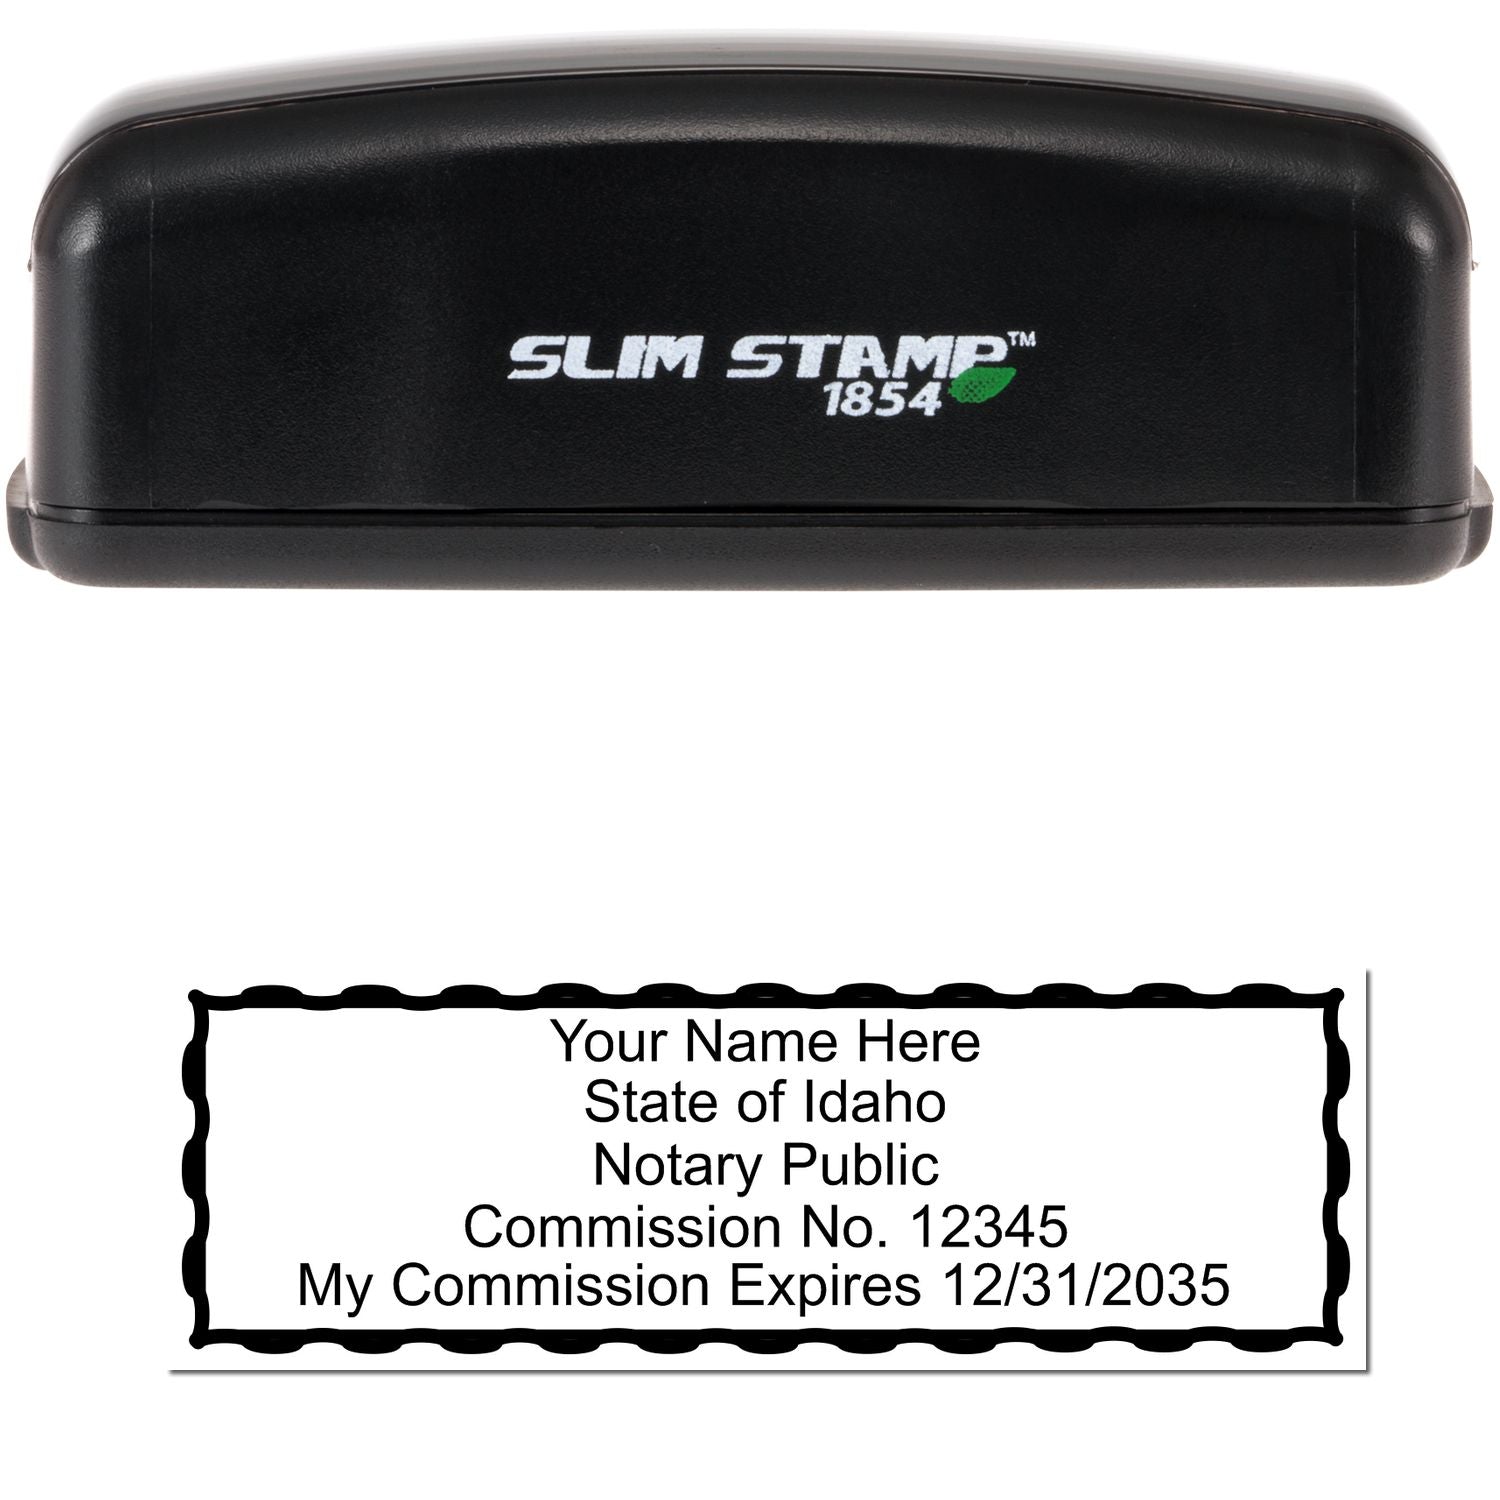 The main image for the Slim Pre-Inked Rectangular Notary Stamp for Idaho depicting a sample of the imprint and electronic files